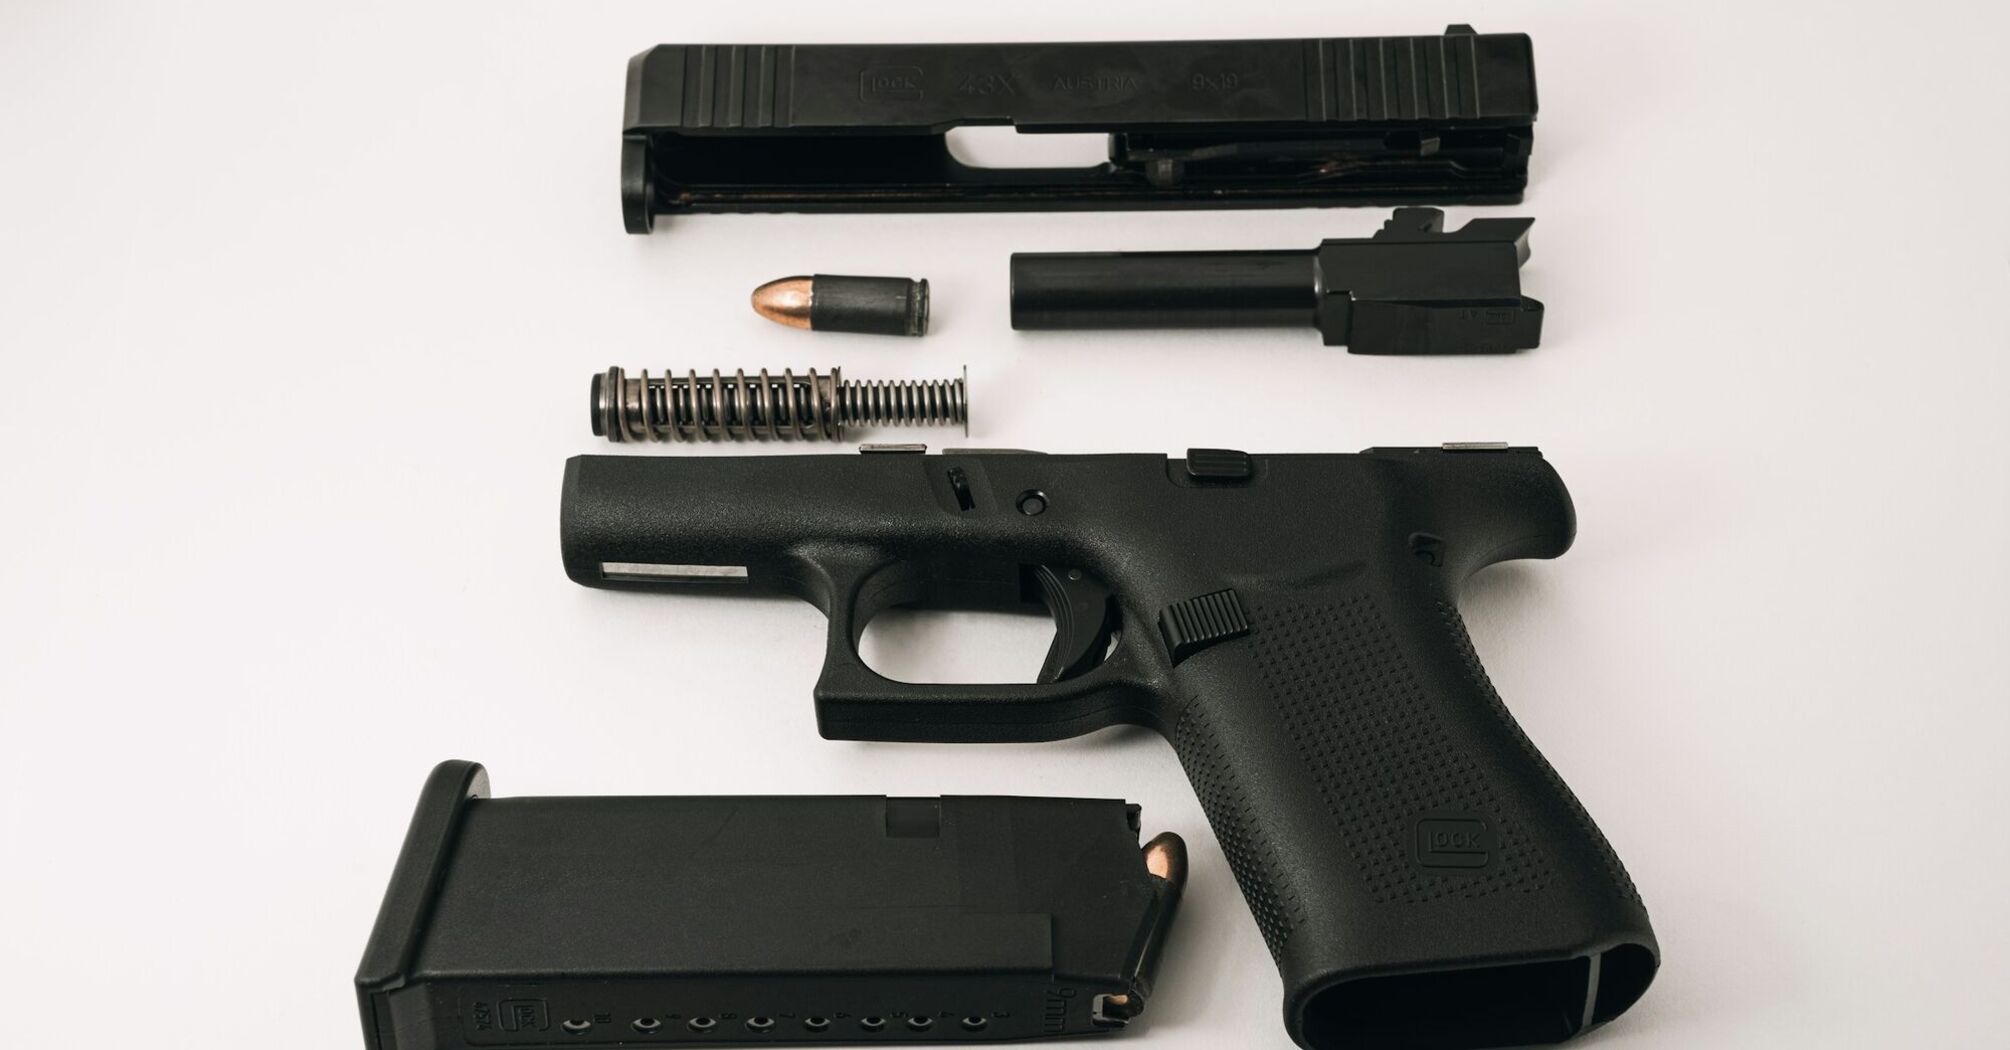 Disassembled handgun with magazine and bullet